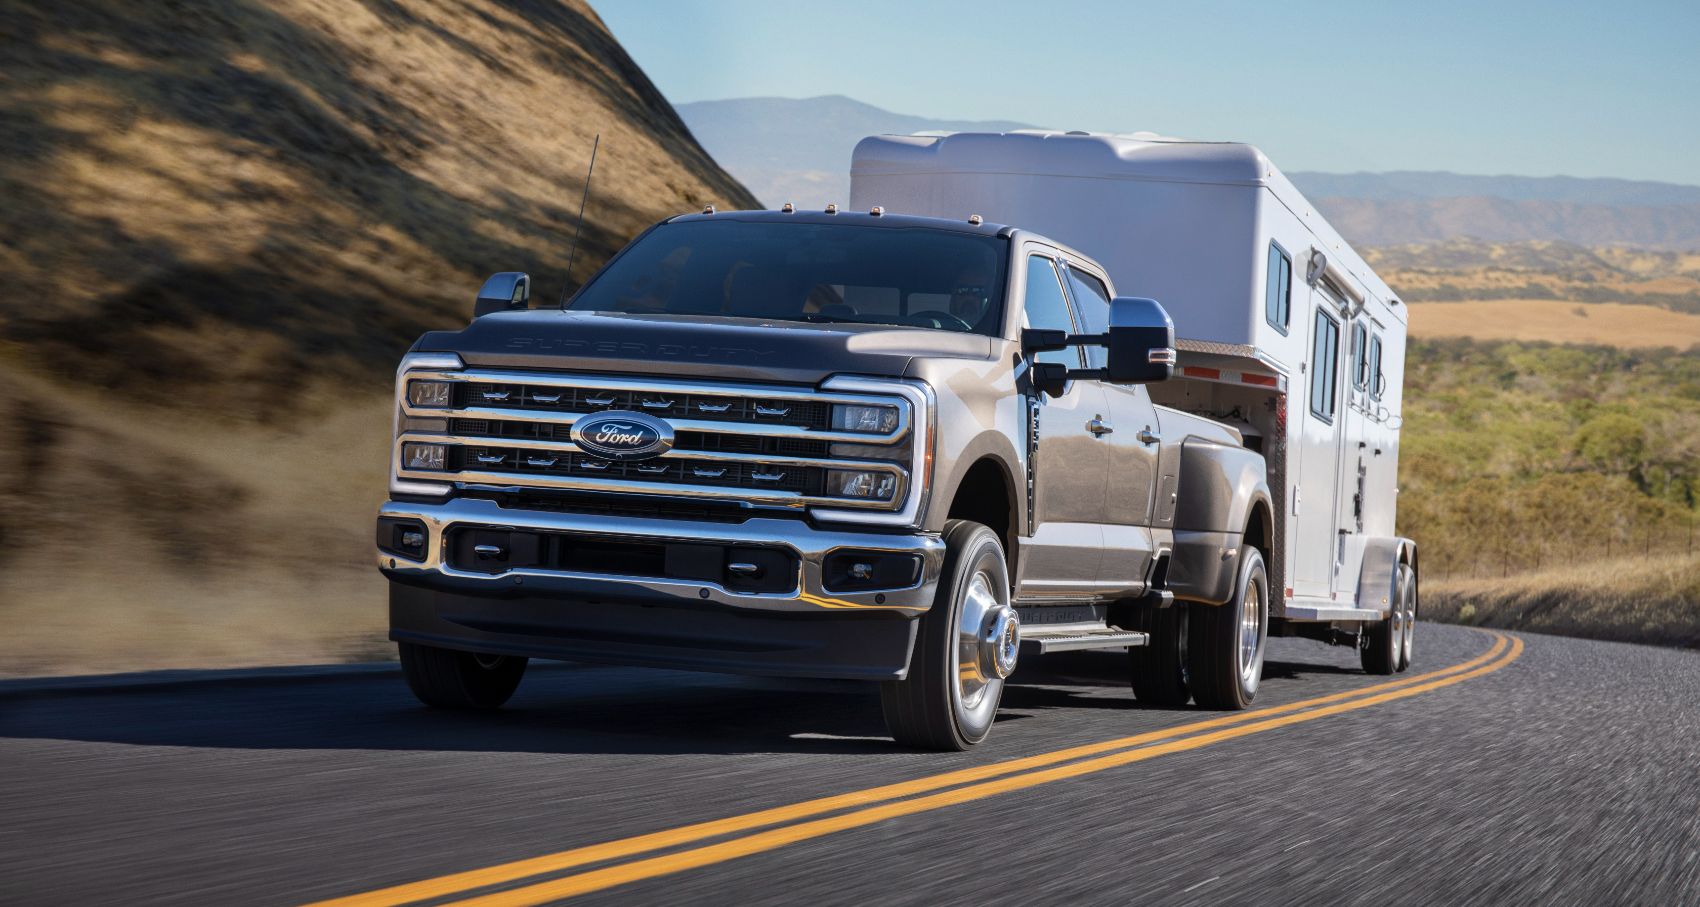 2023 Ford Super Duty Revealed Engine Updates, New Technology, Safety